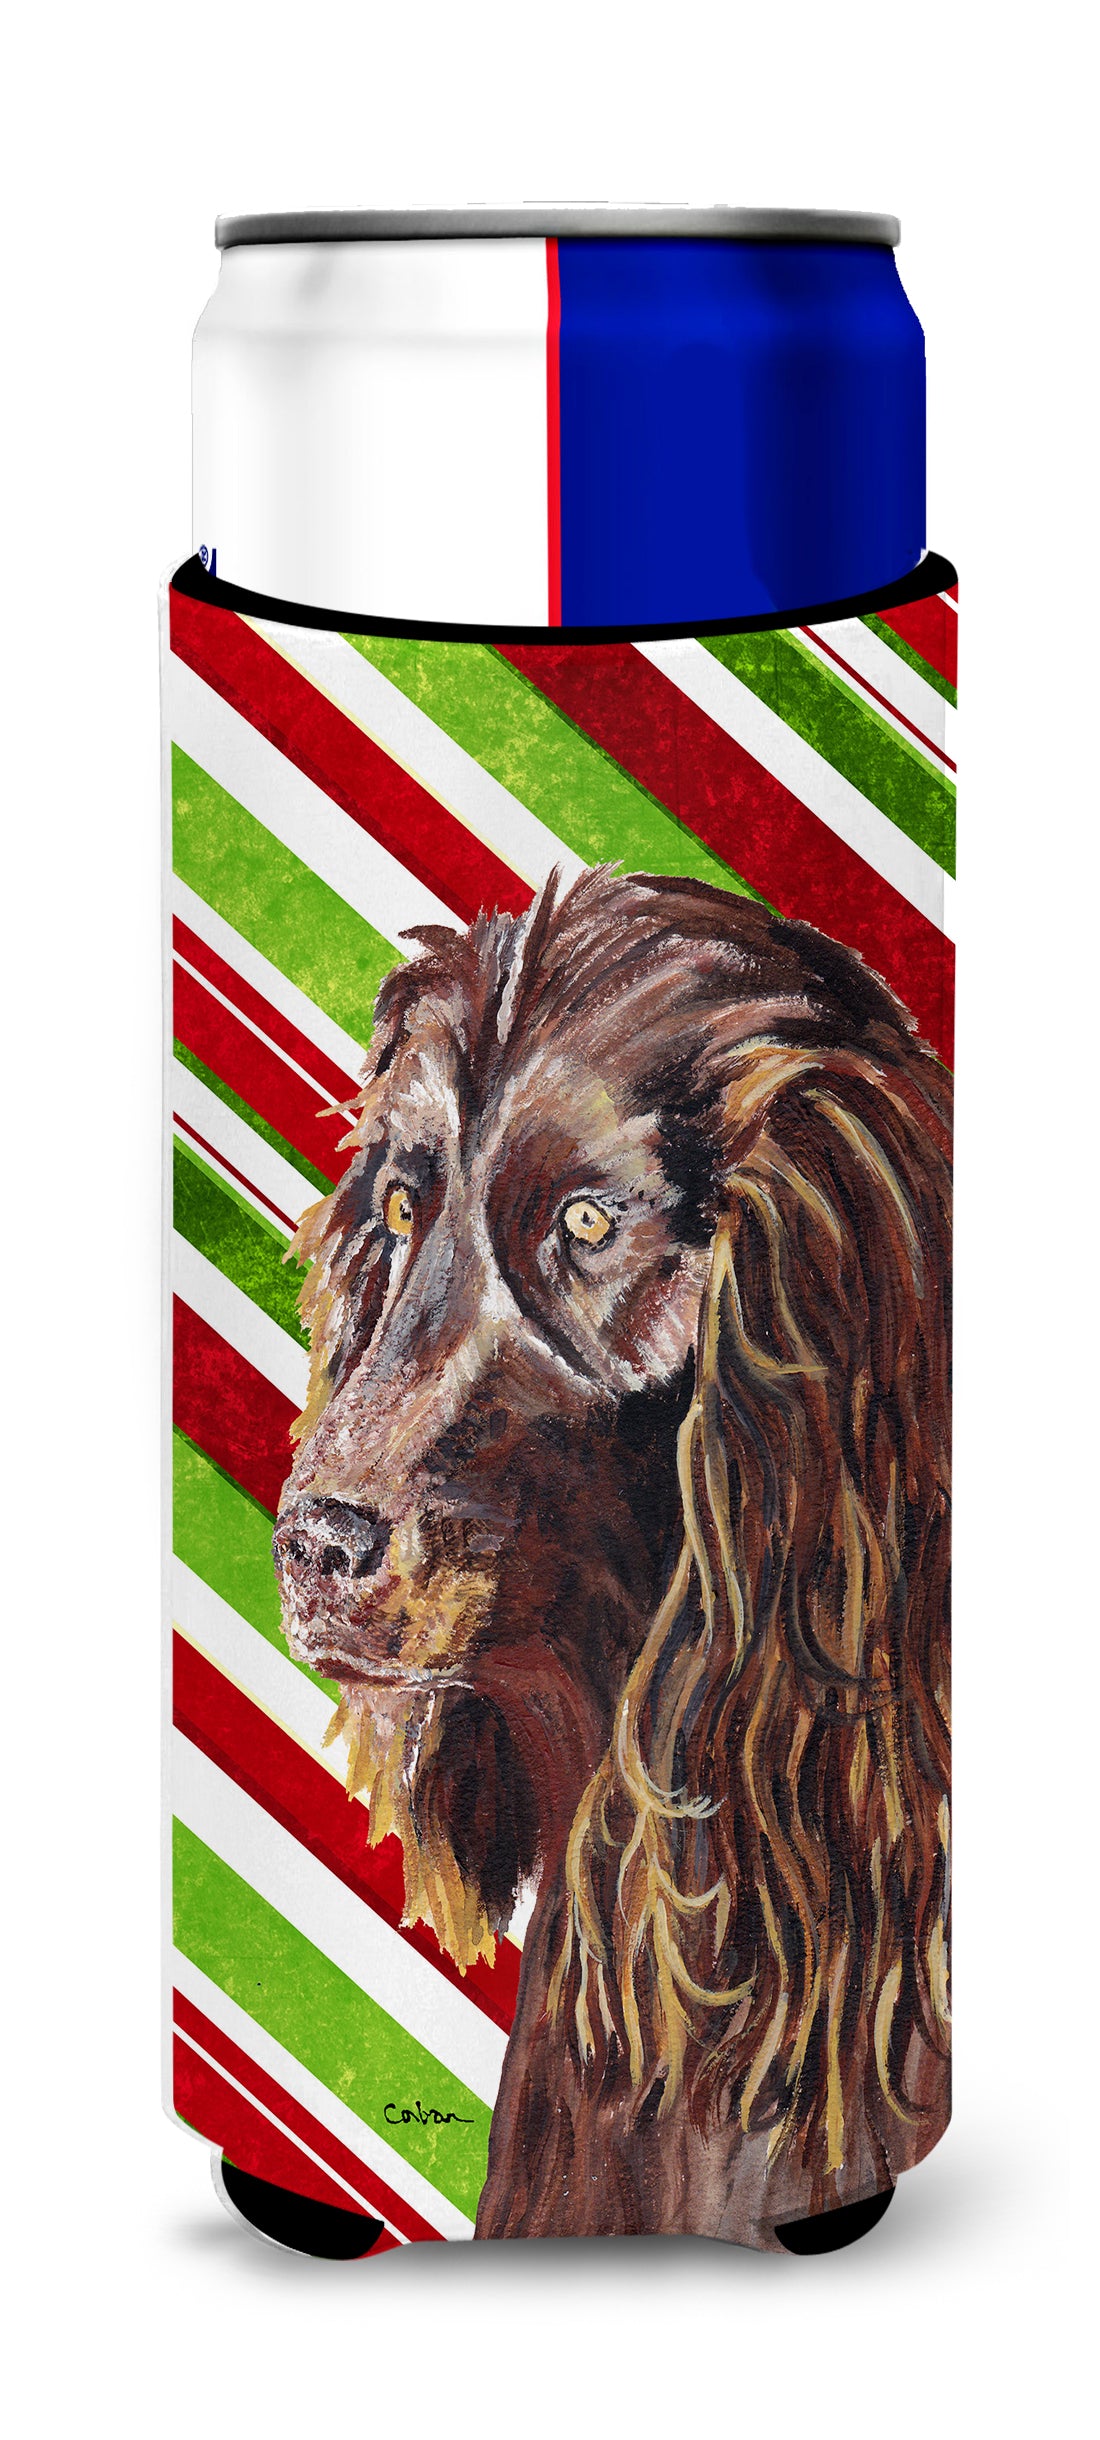 Boykin Spaniel Candy Cane Christmas Ultra Beverage Insulators for slim cans.